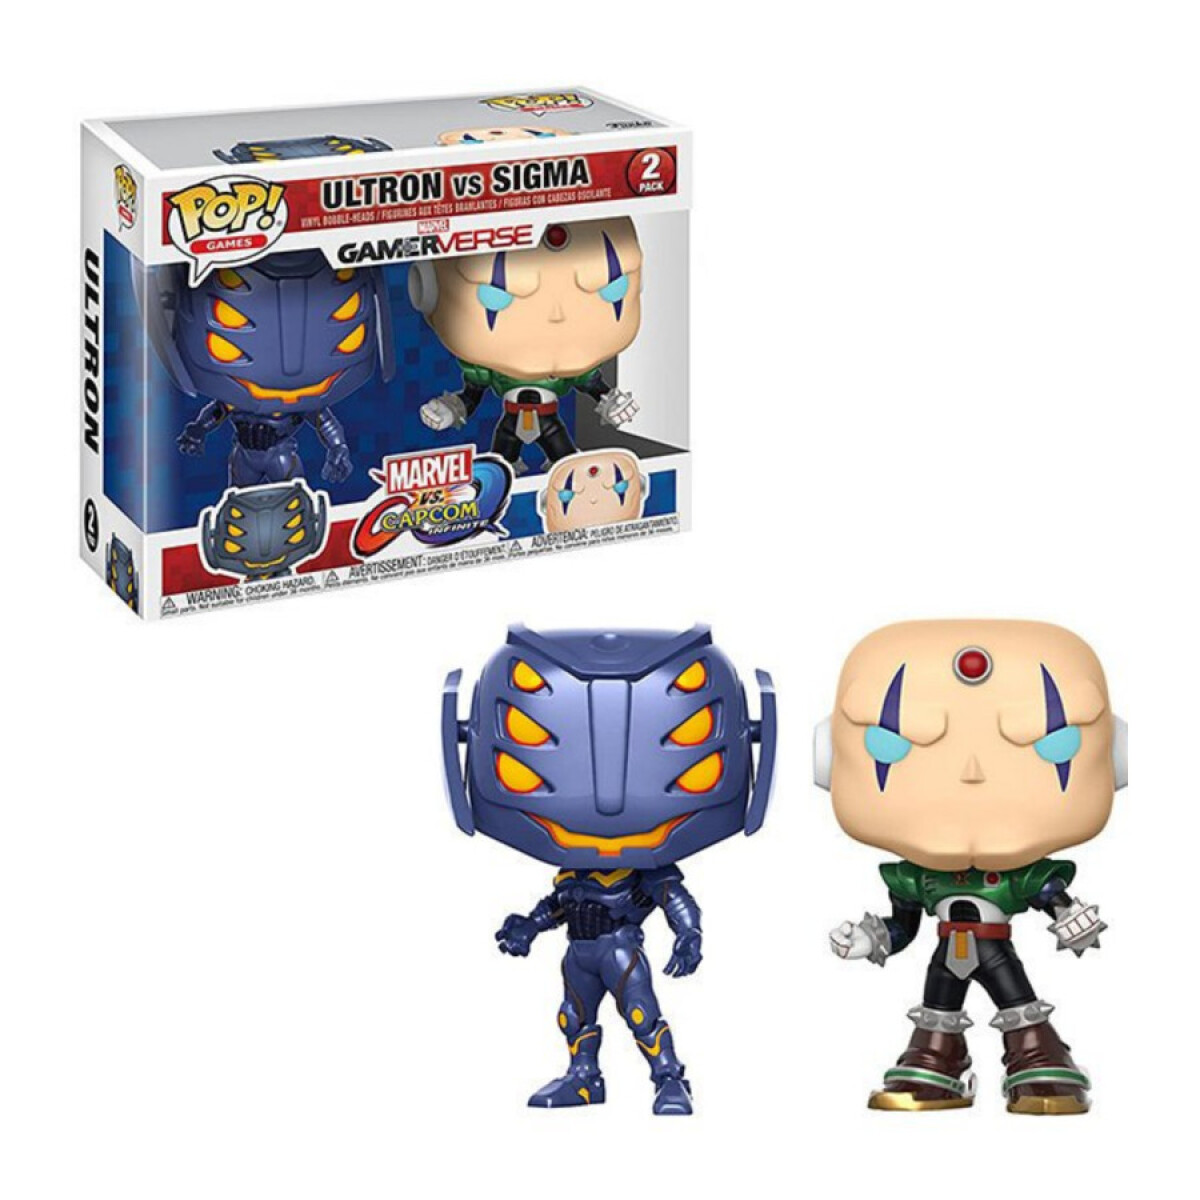 Ultron vs Sigma · Game Verse 2 Pack 